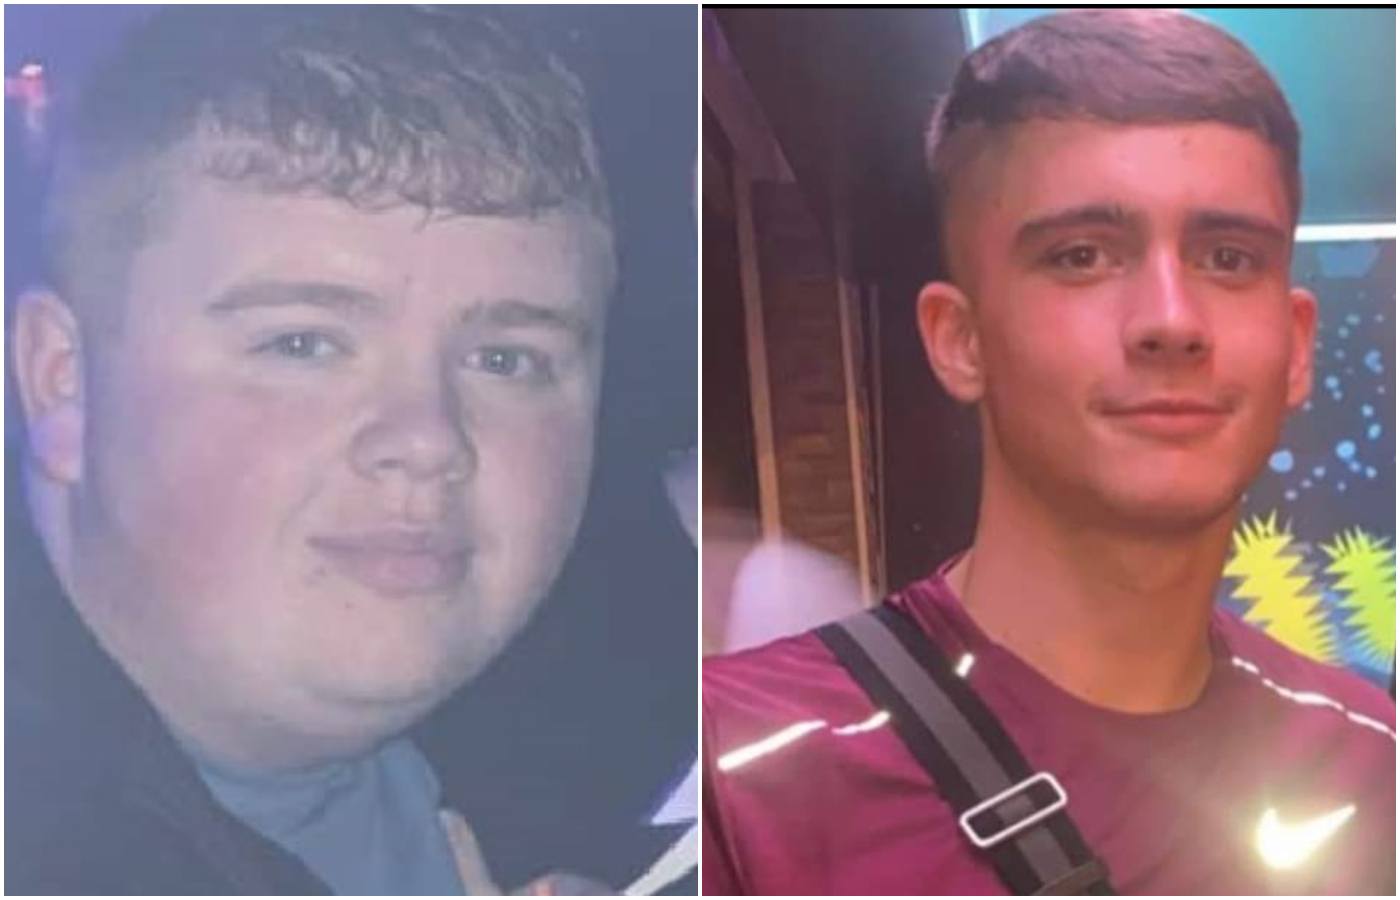 Scott Allison and Marcus Dick died after attending an SWG3 DJ event in August. 